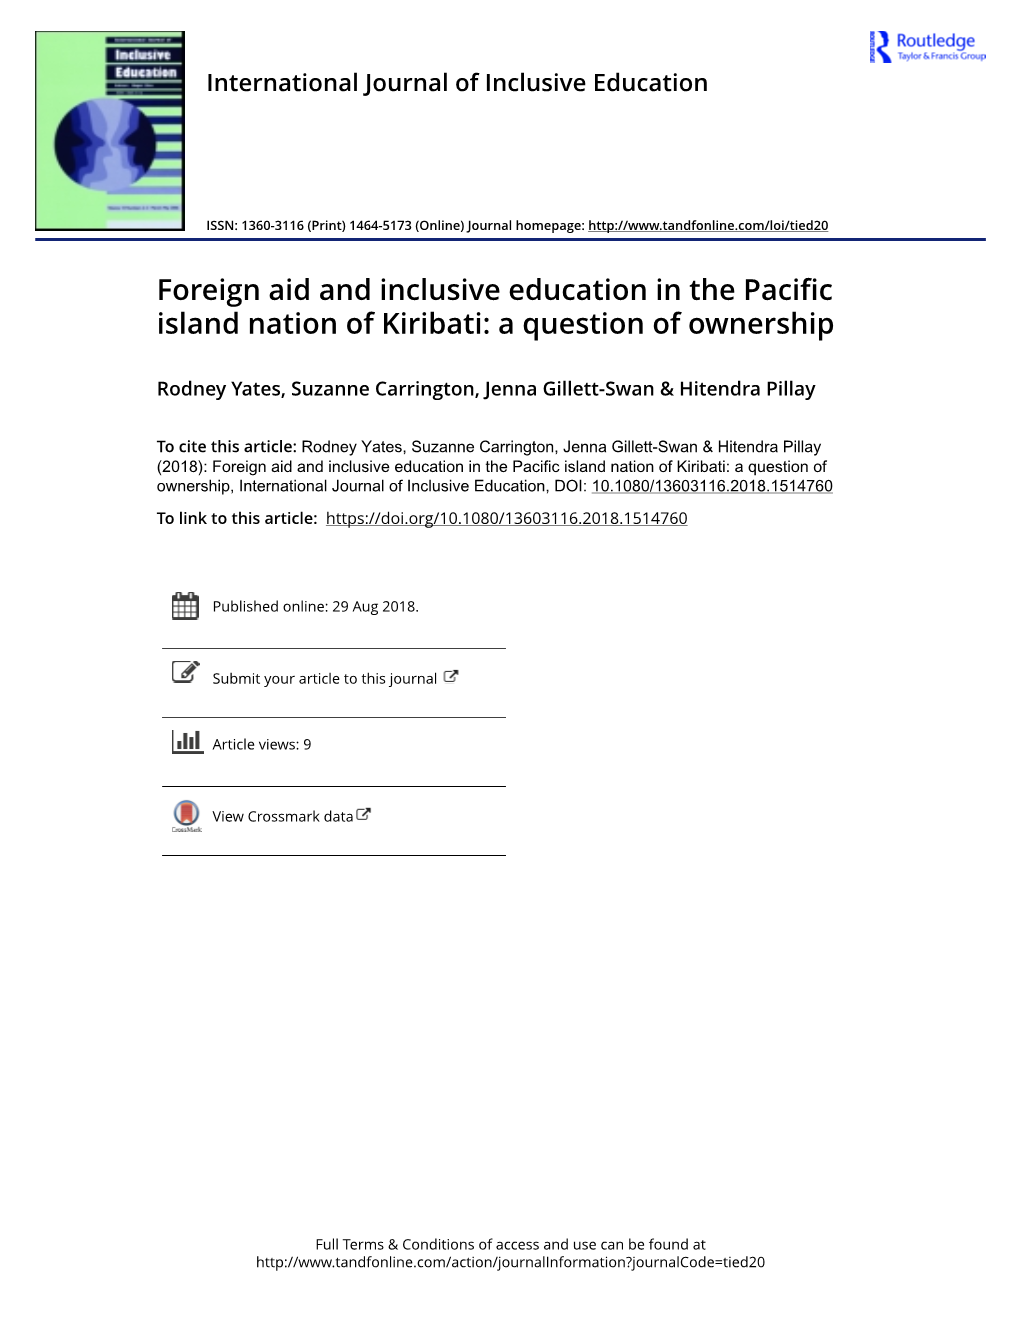 Foreign Aid and Inclusive Education in the Pacific Island Nation of Kiribati: a Question of Ownership